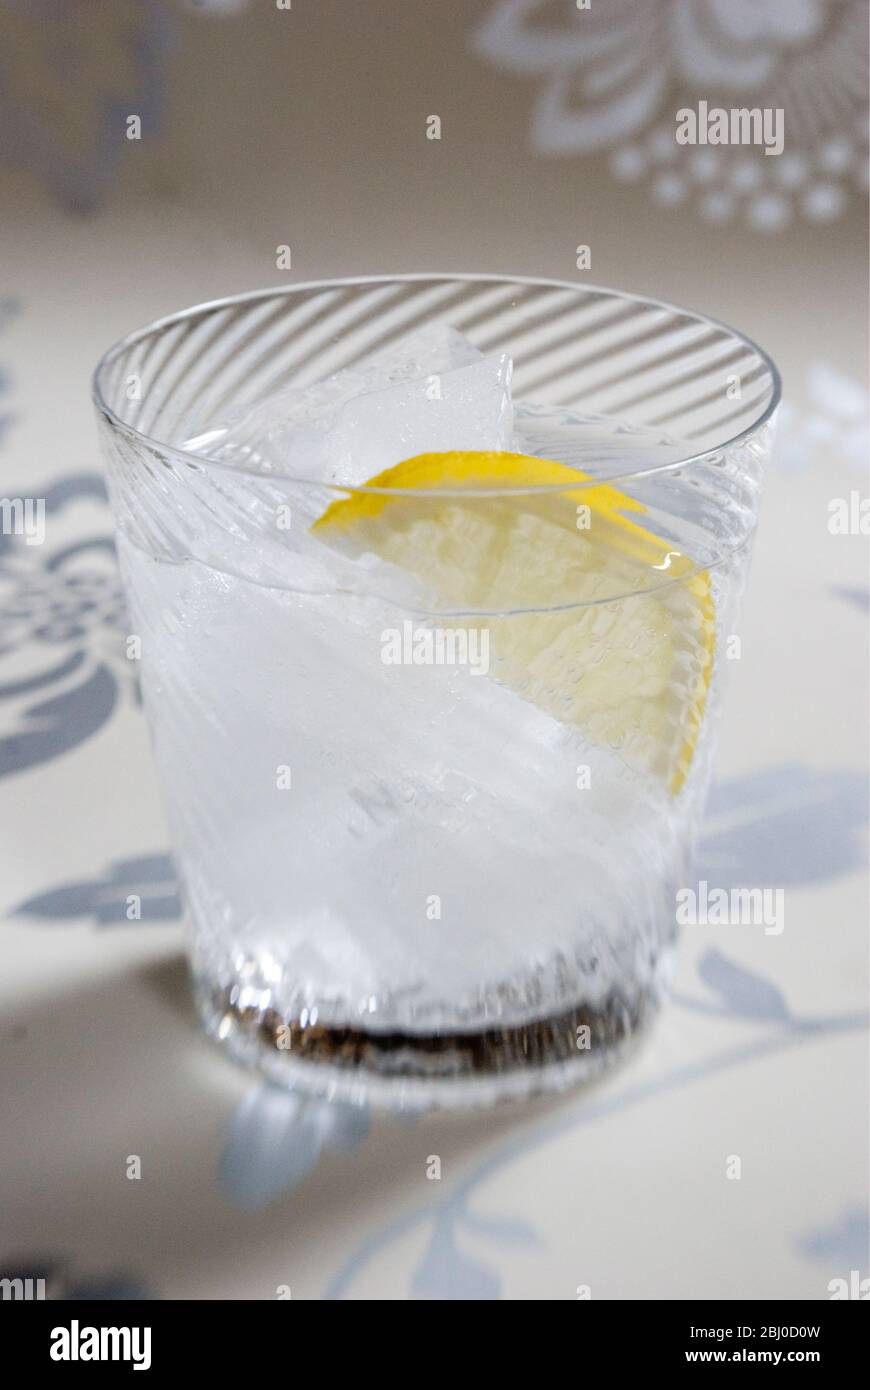 Fine spiral blown glass of clear spirit with soda or tonic, and slice of lemon on decorative background - Stock Photo